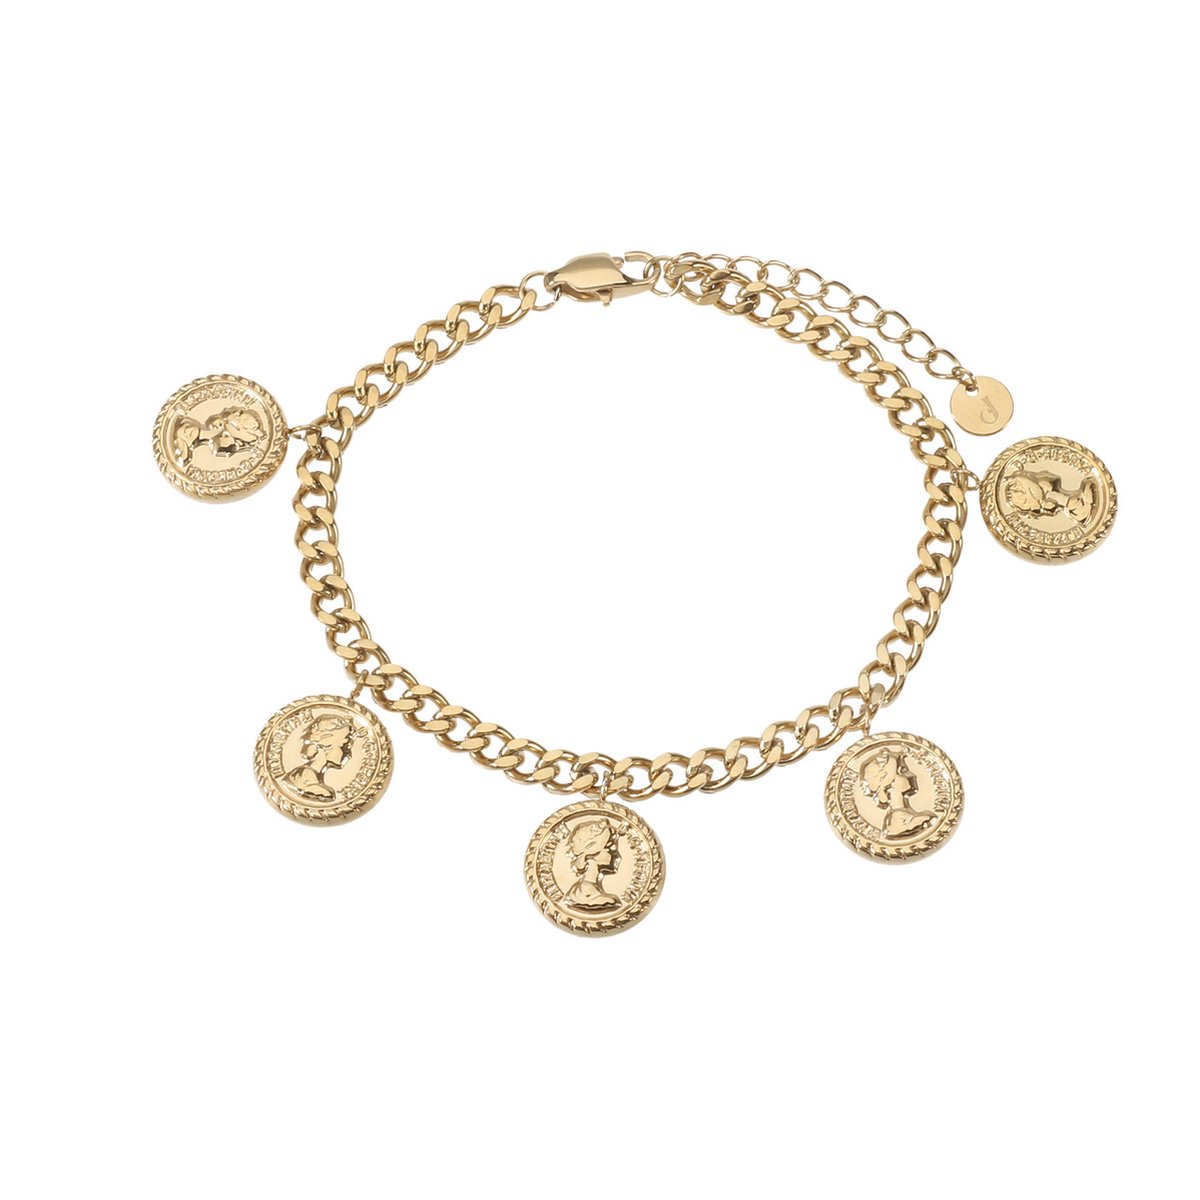 The Jewellery Club - Multi coin bracelet gold - Armband - Dames armband - Munten armband - Stainless steel - Goud - 17 cm - The Jewellery Club